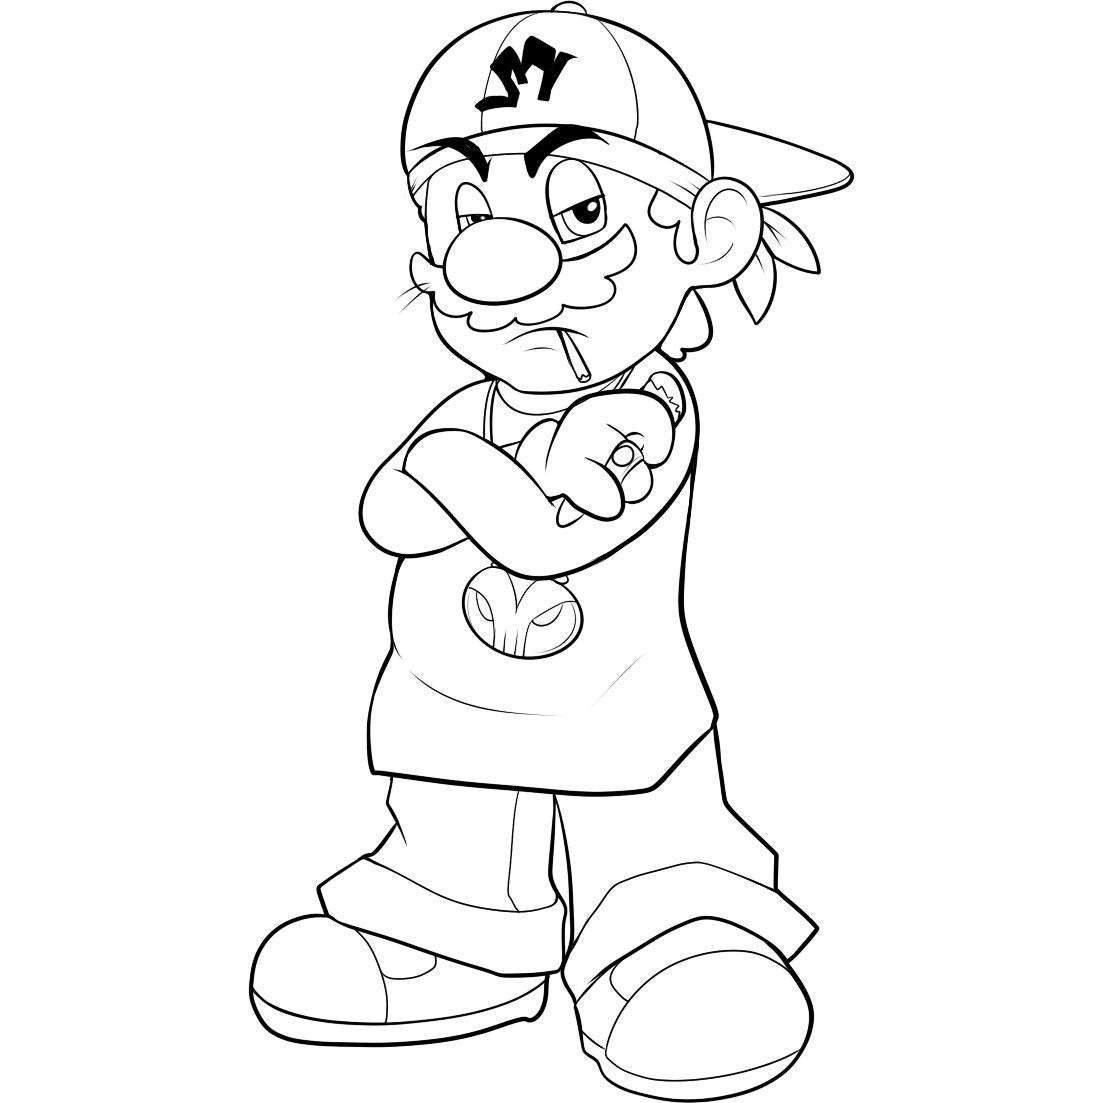 Mario Kart 8 Coloring Pages Free download on ClipArtMag